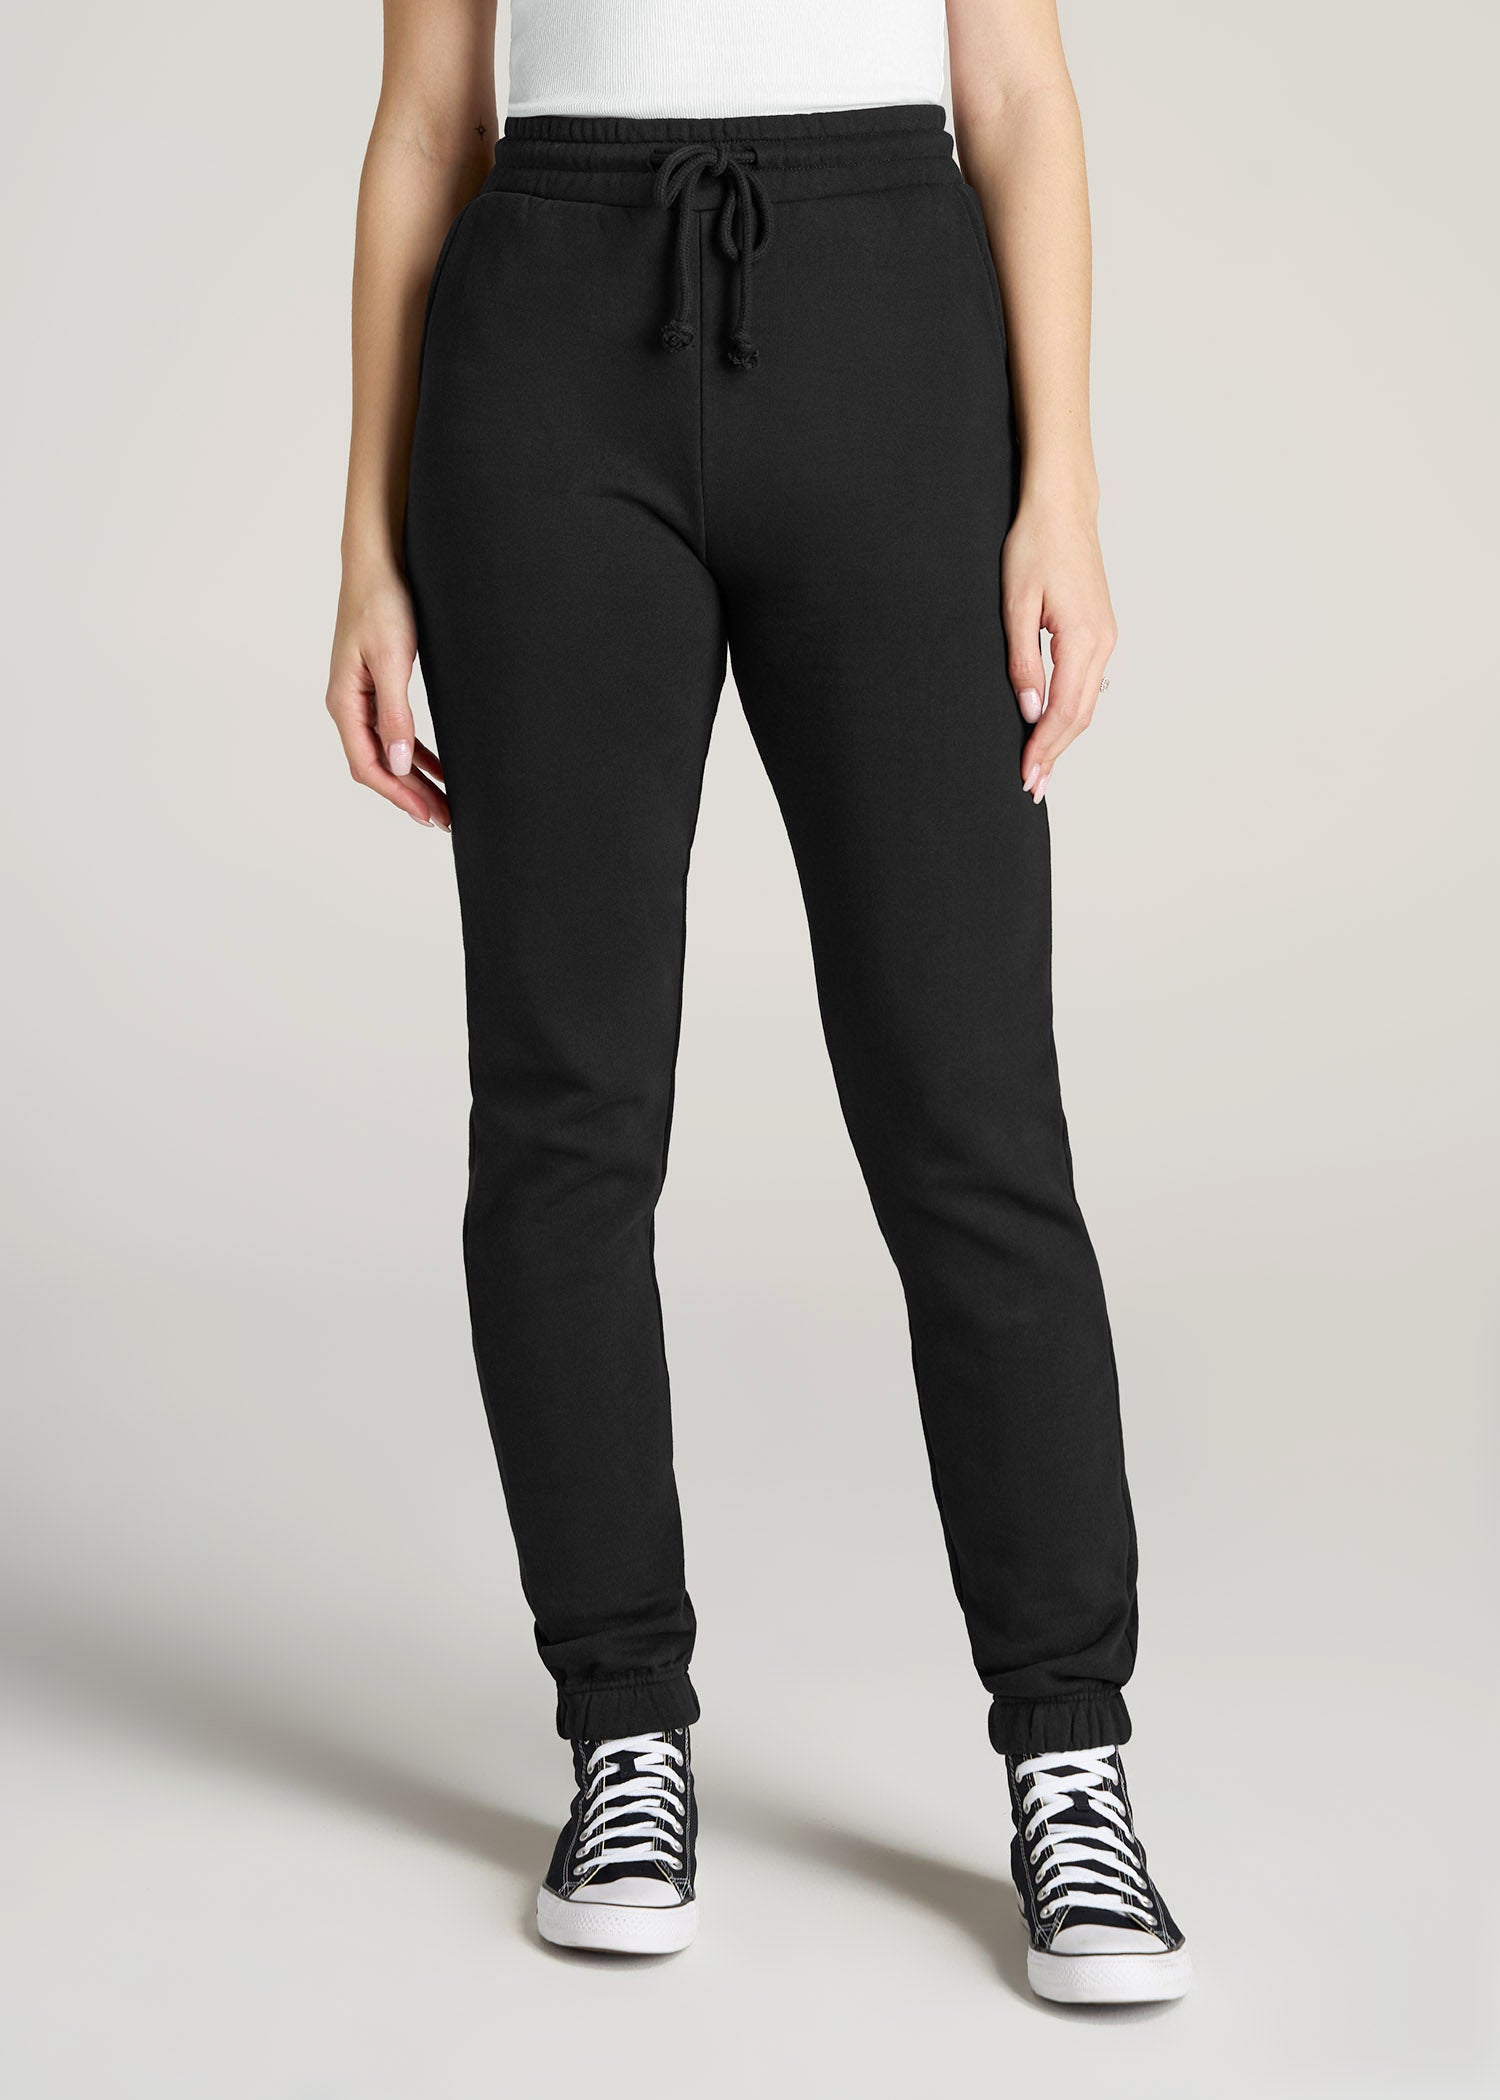  Sweatpants for Women, High Waisted Jogging Pants